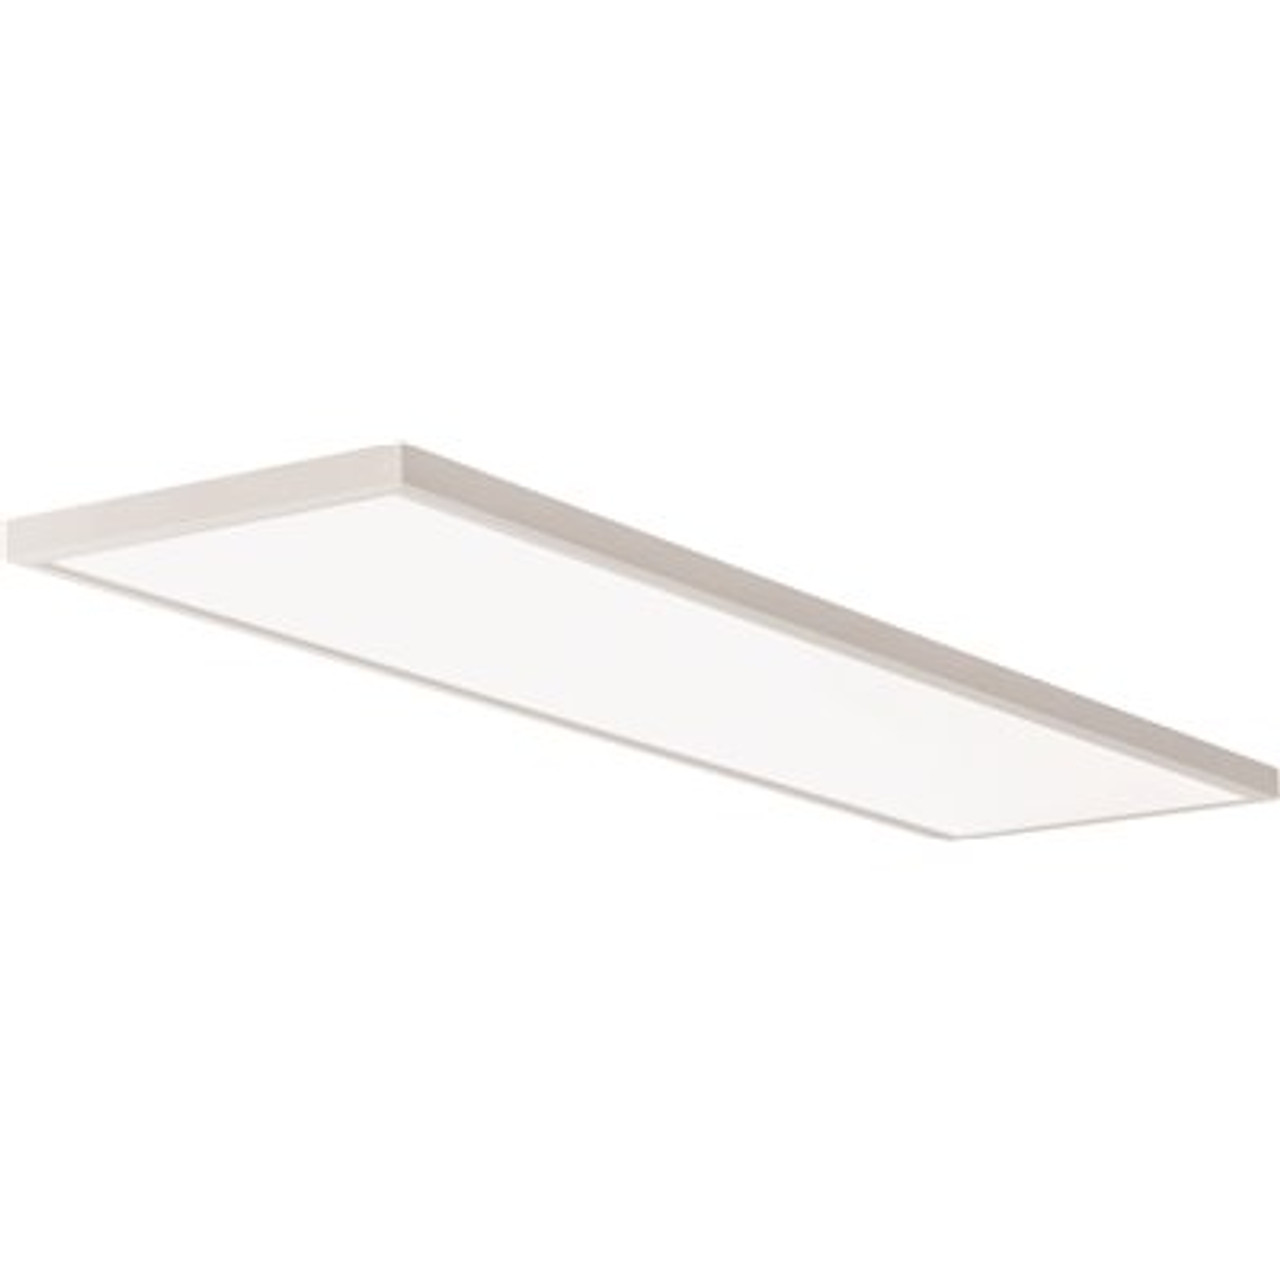 Lithonia Lighting Contractor Select 1 Ft. X 4 Ft. 2400 Lumens/3300 Lumens/4400 Lumens White Integrated Led Flat Panel Light